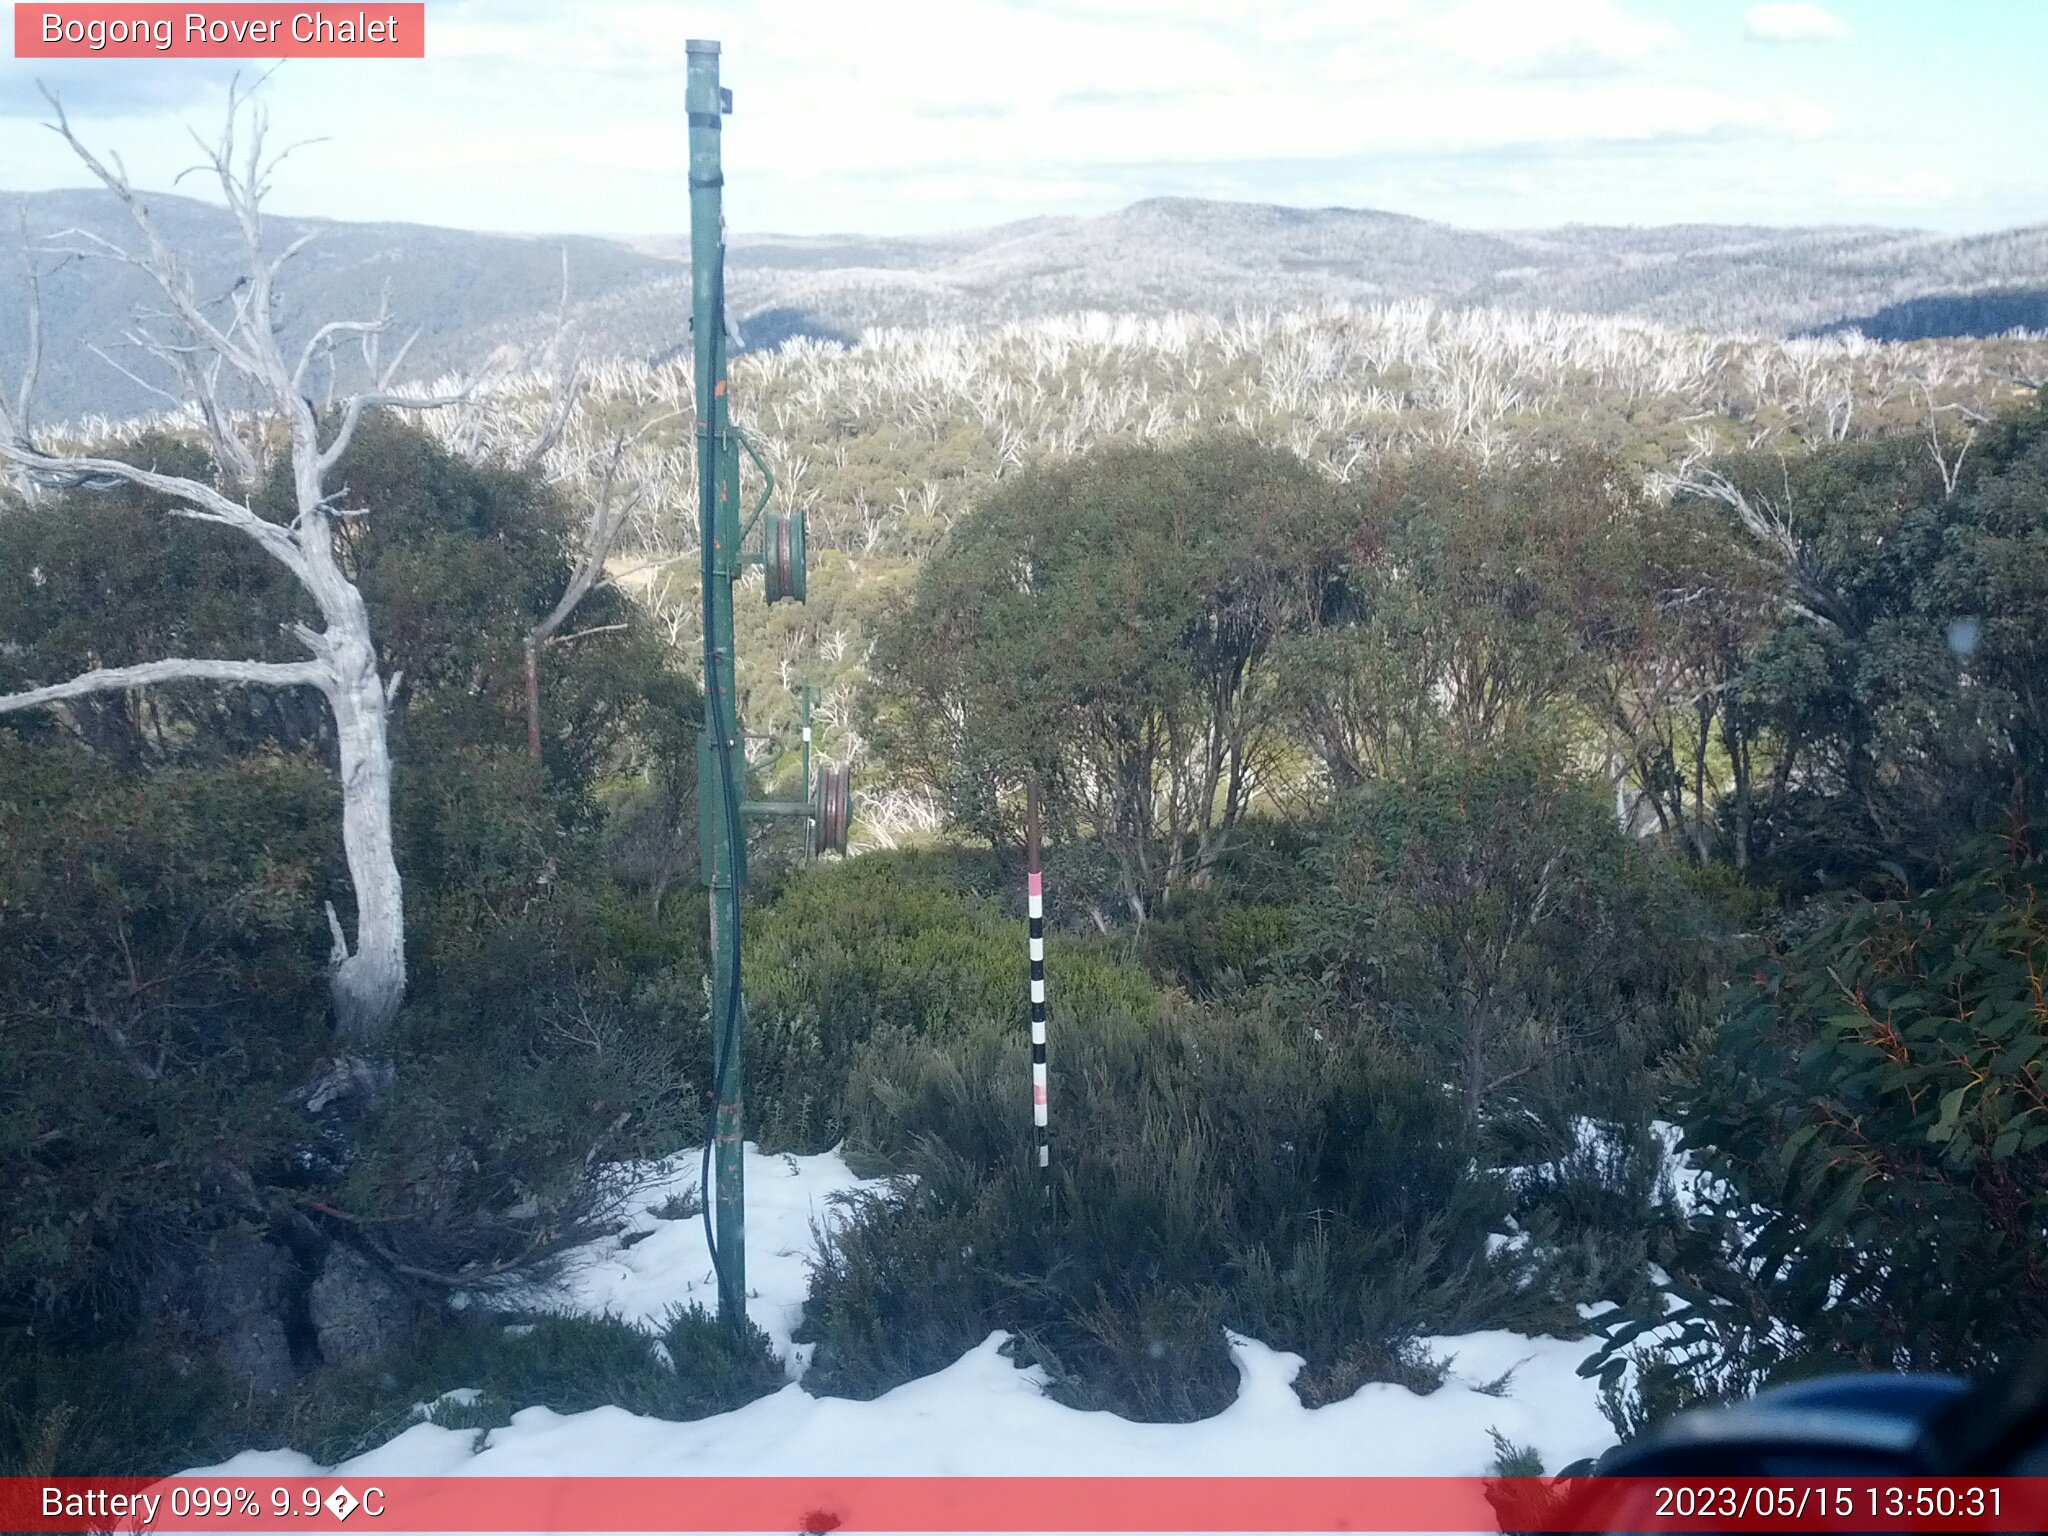 Bogong Web Cam 1:50pm Monday 15th of May 2023